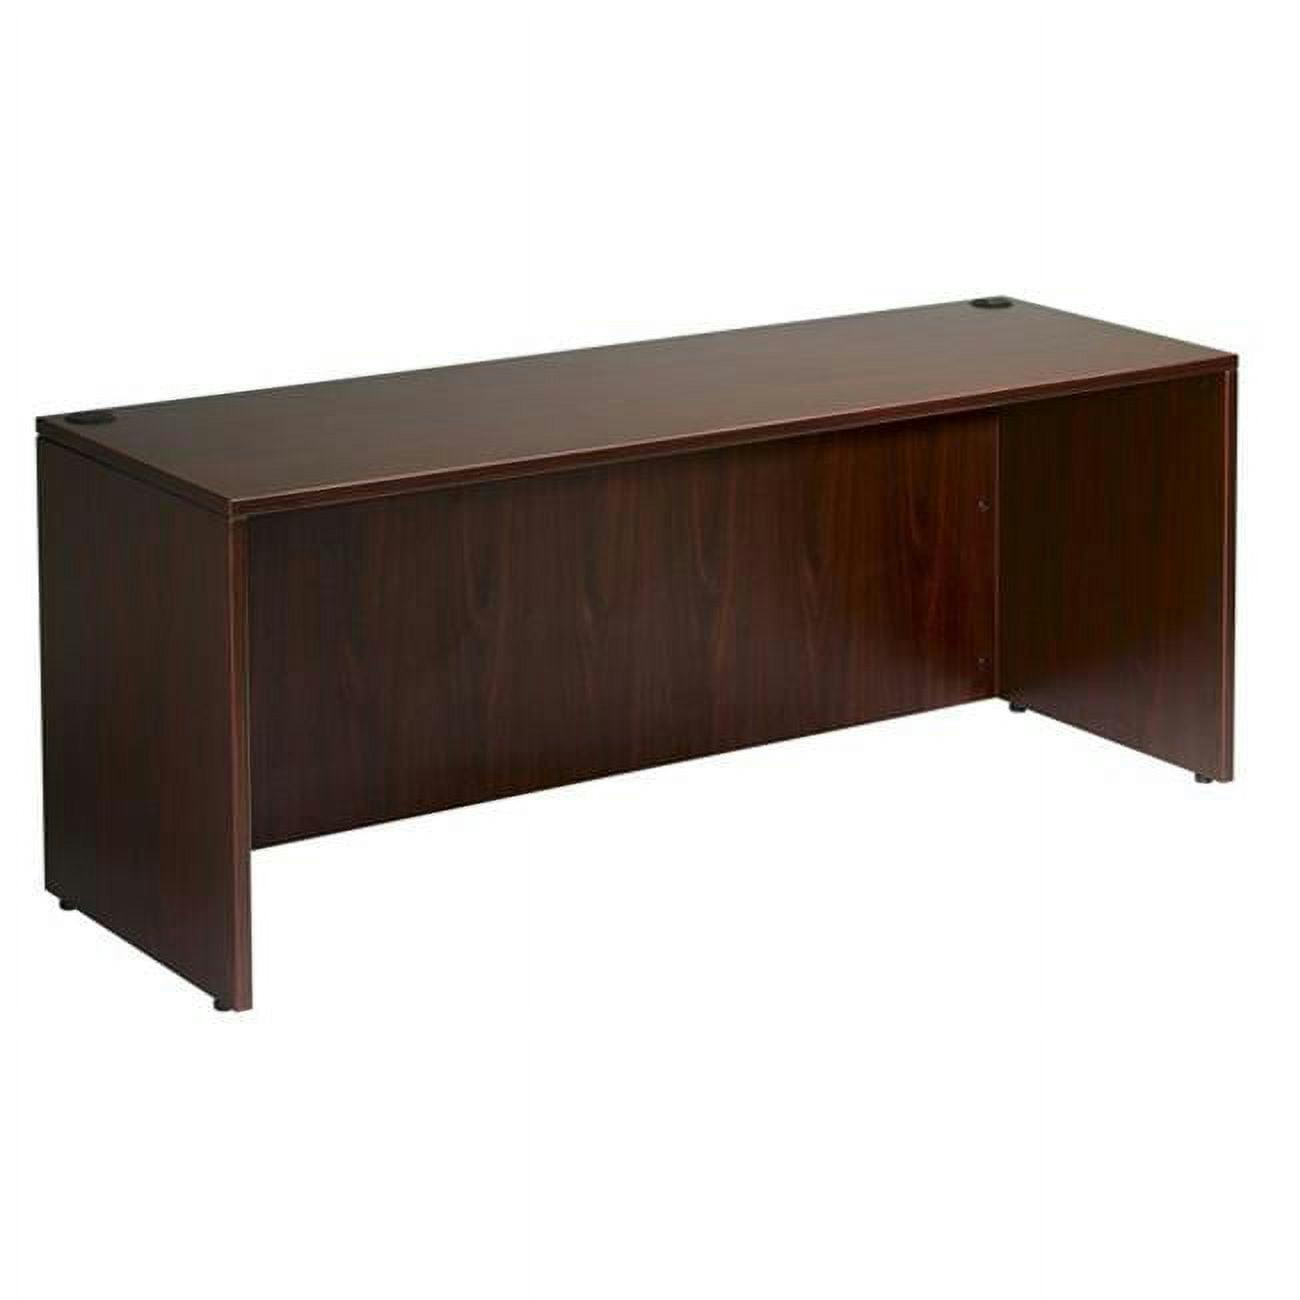 Executive Mahogany Laminate Desk with Wire Management